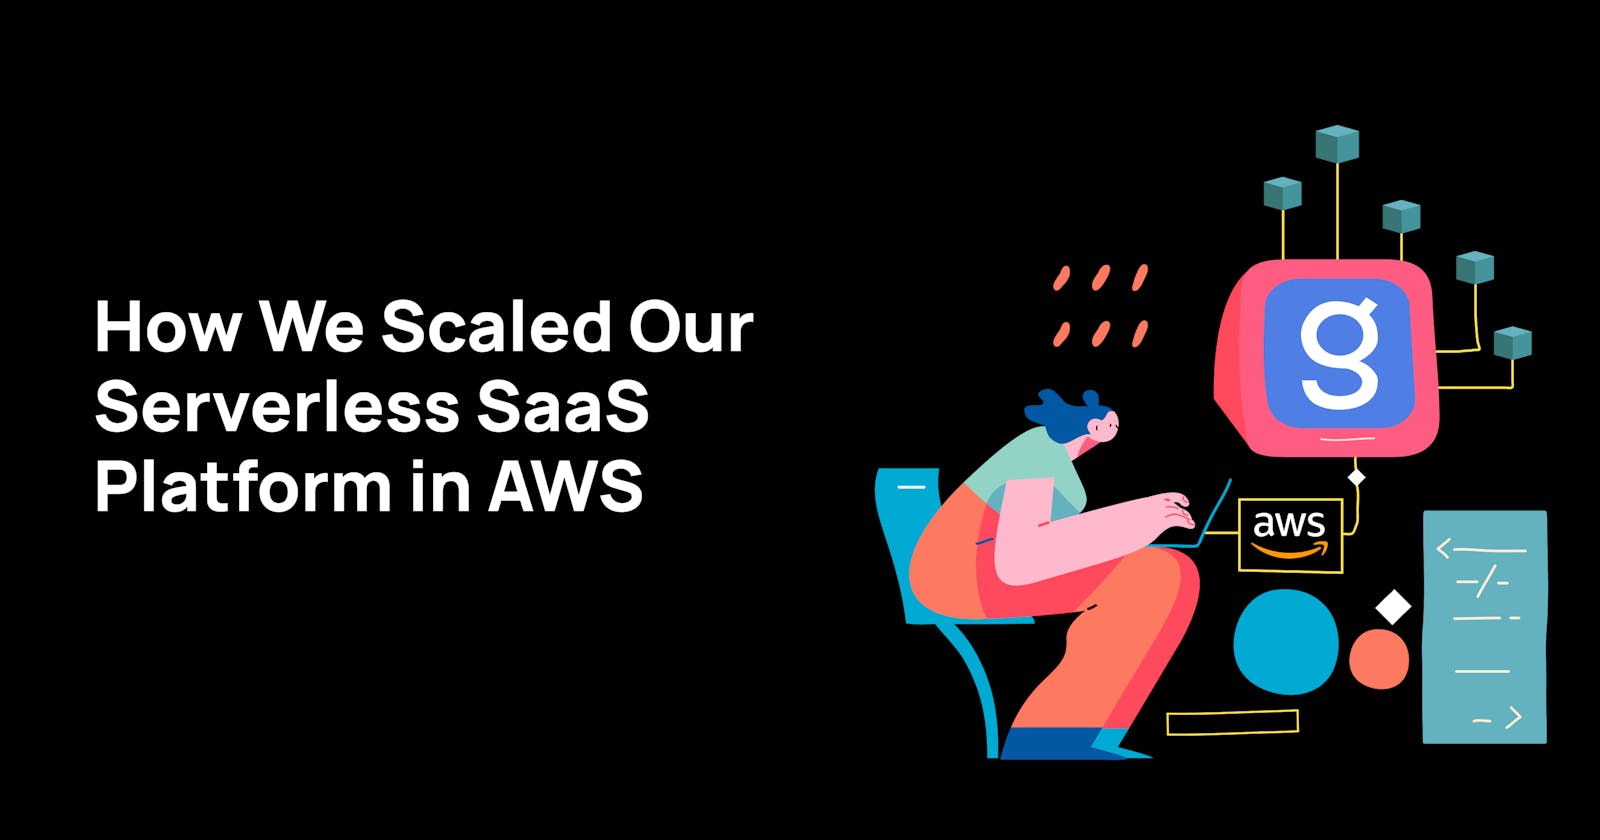 How We Scaled Our Serverless SaaS Platform in AWS